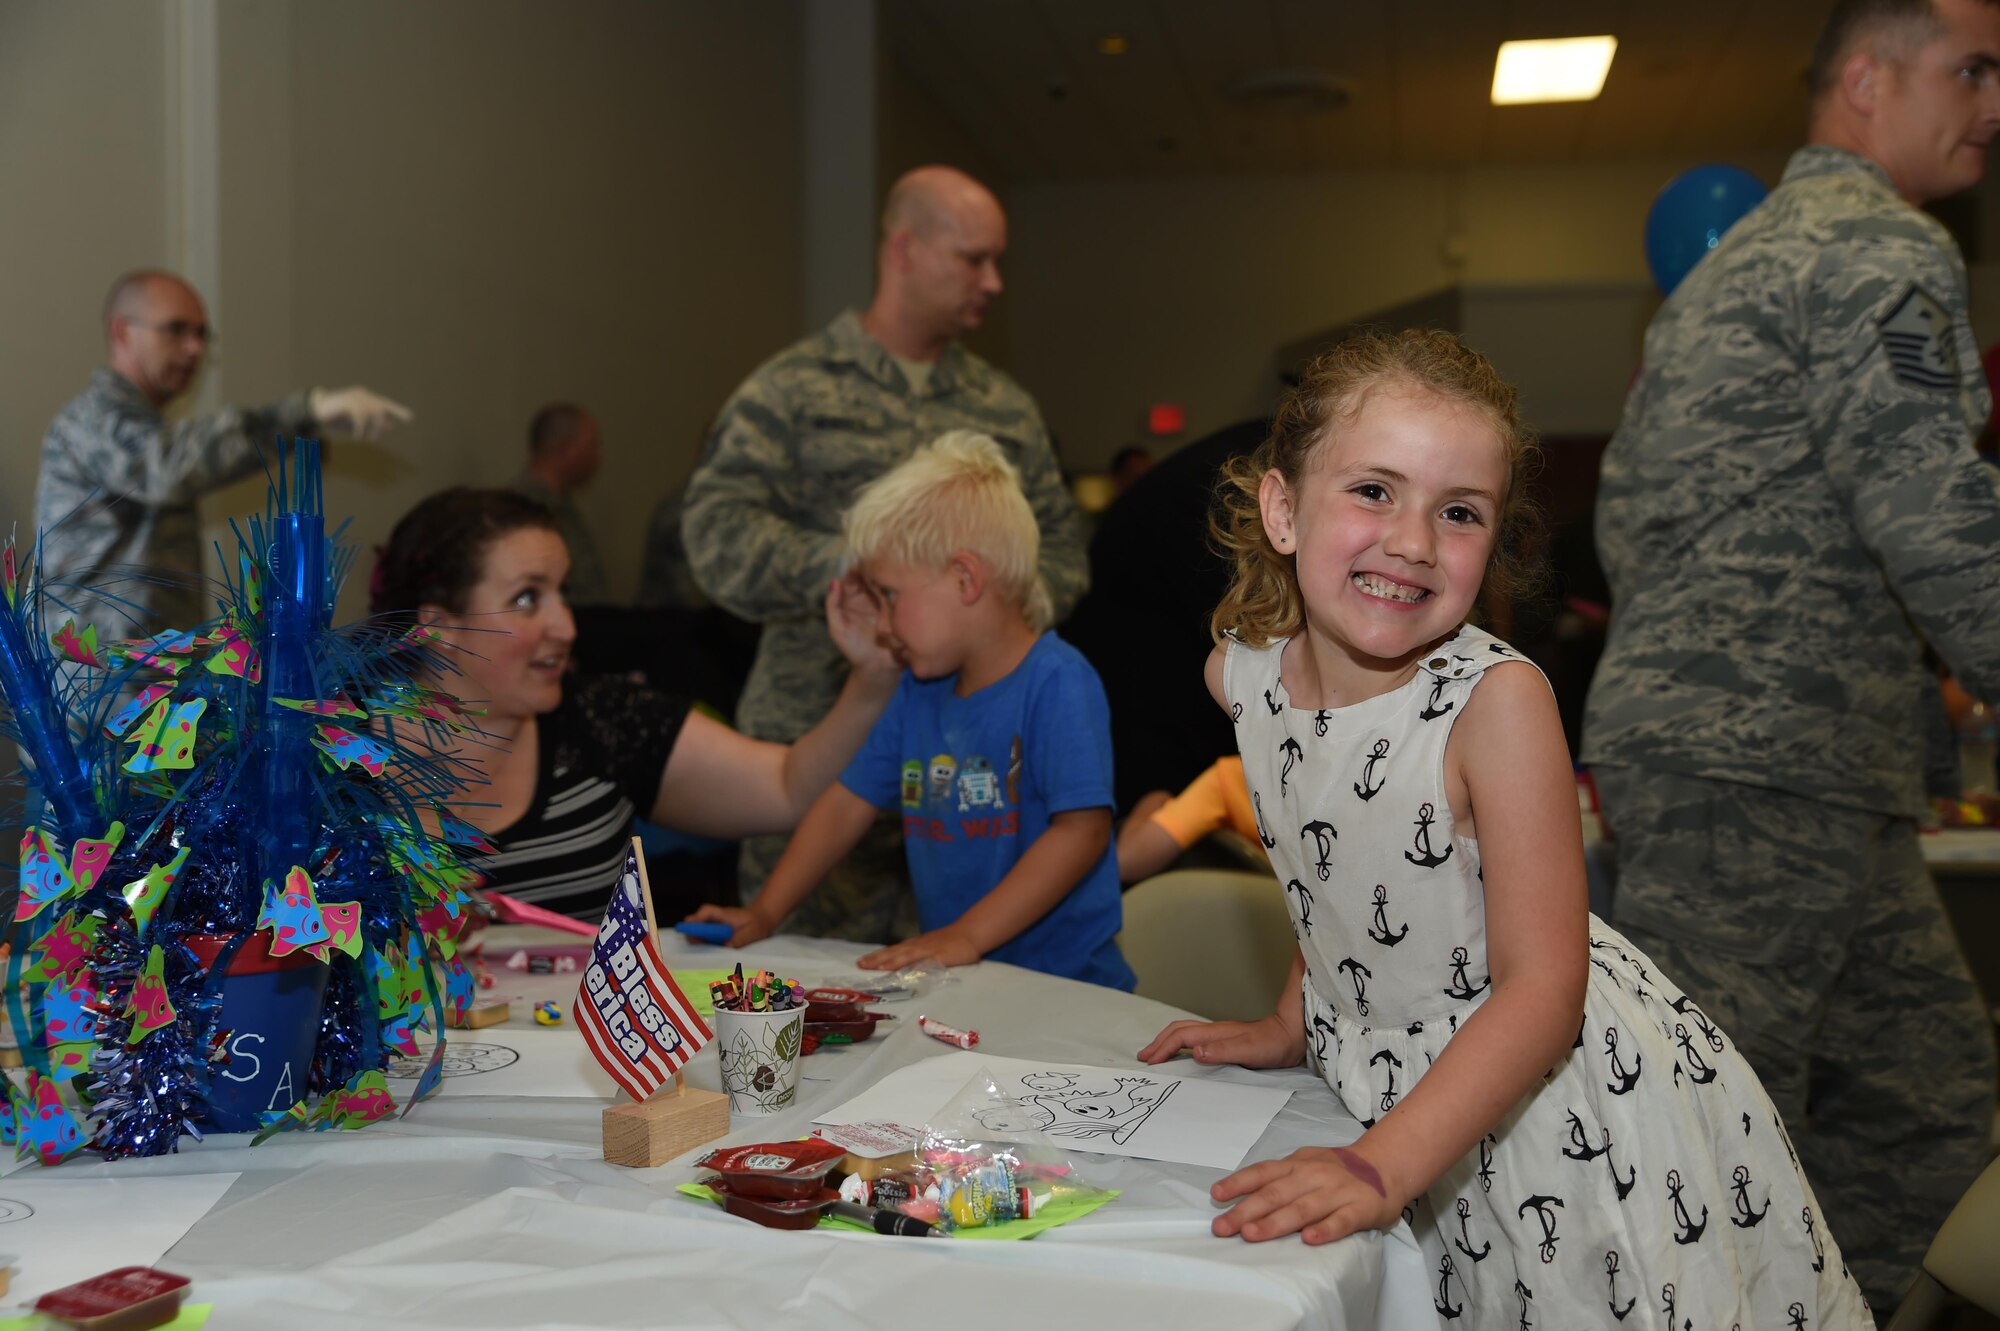 A child of a deployed McChord member attends the Deployed Family Dinner August 15, 2016, at the Chapel Support Center, Joint Base Lewis-McChord, Wash. The quarterly event offers entertainment and a catered meal to families whose loved ones are currently deployed, have recently deployed or will be deploying in the near future. (U.S. Air Force photo/Staff Sgt. Naomi Shipley)